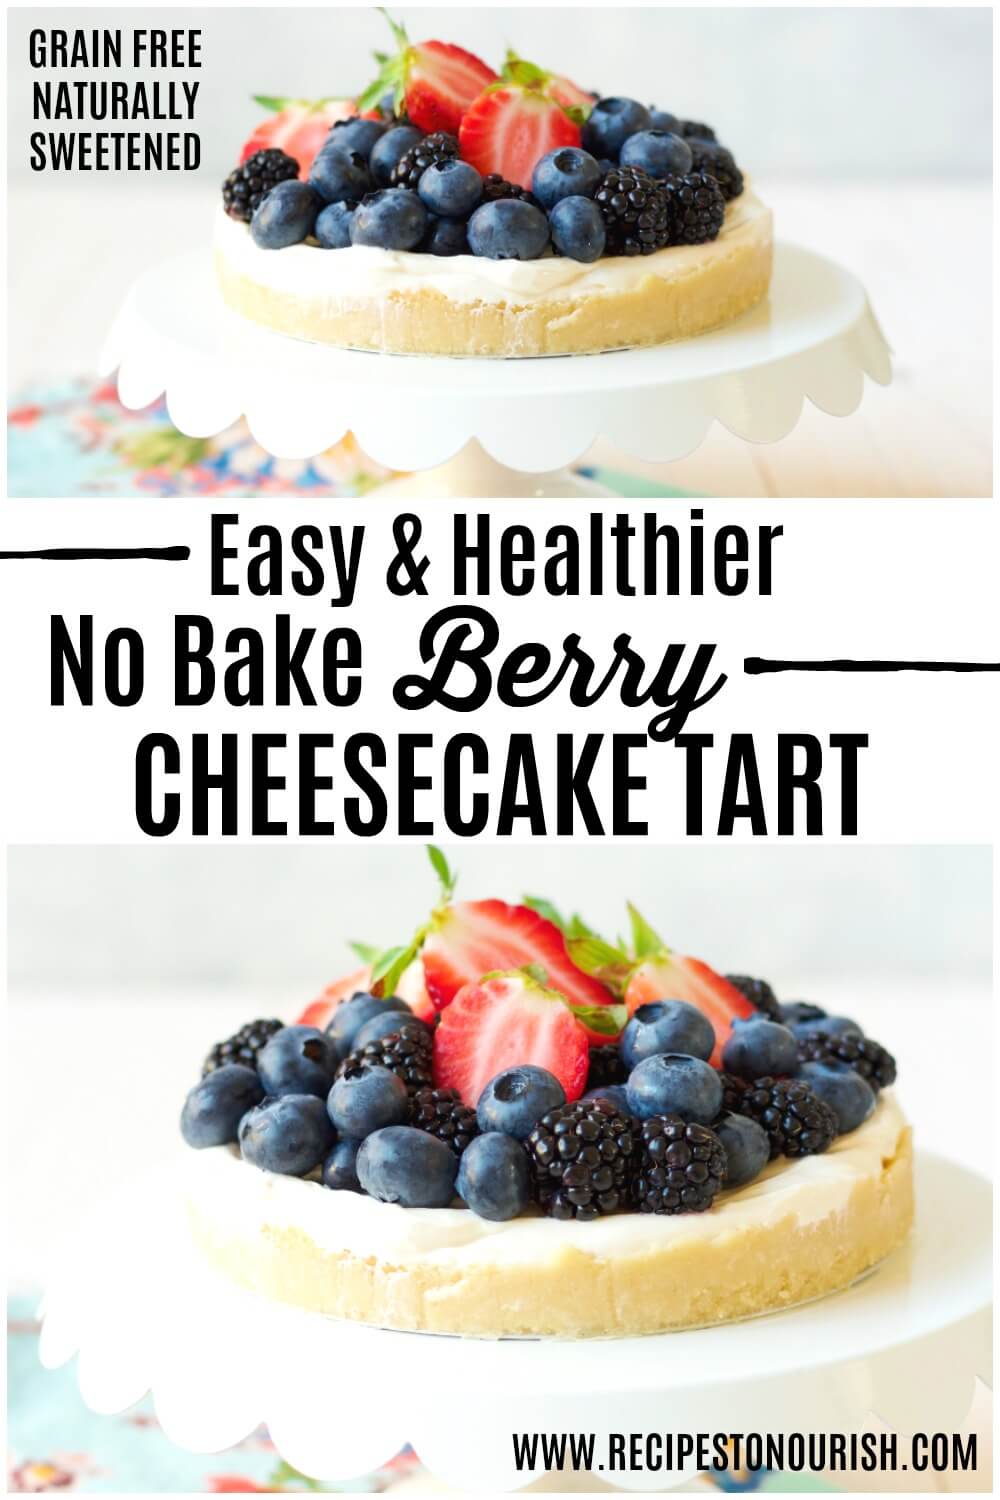 Cheesecake tart topped with fresh blueberries, strawberries and blackberries sitting on a cake stand.